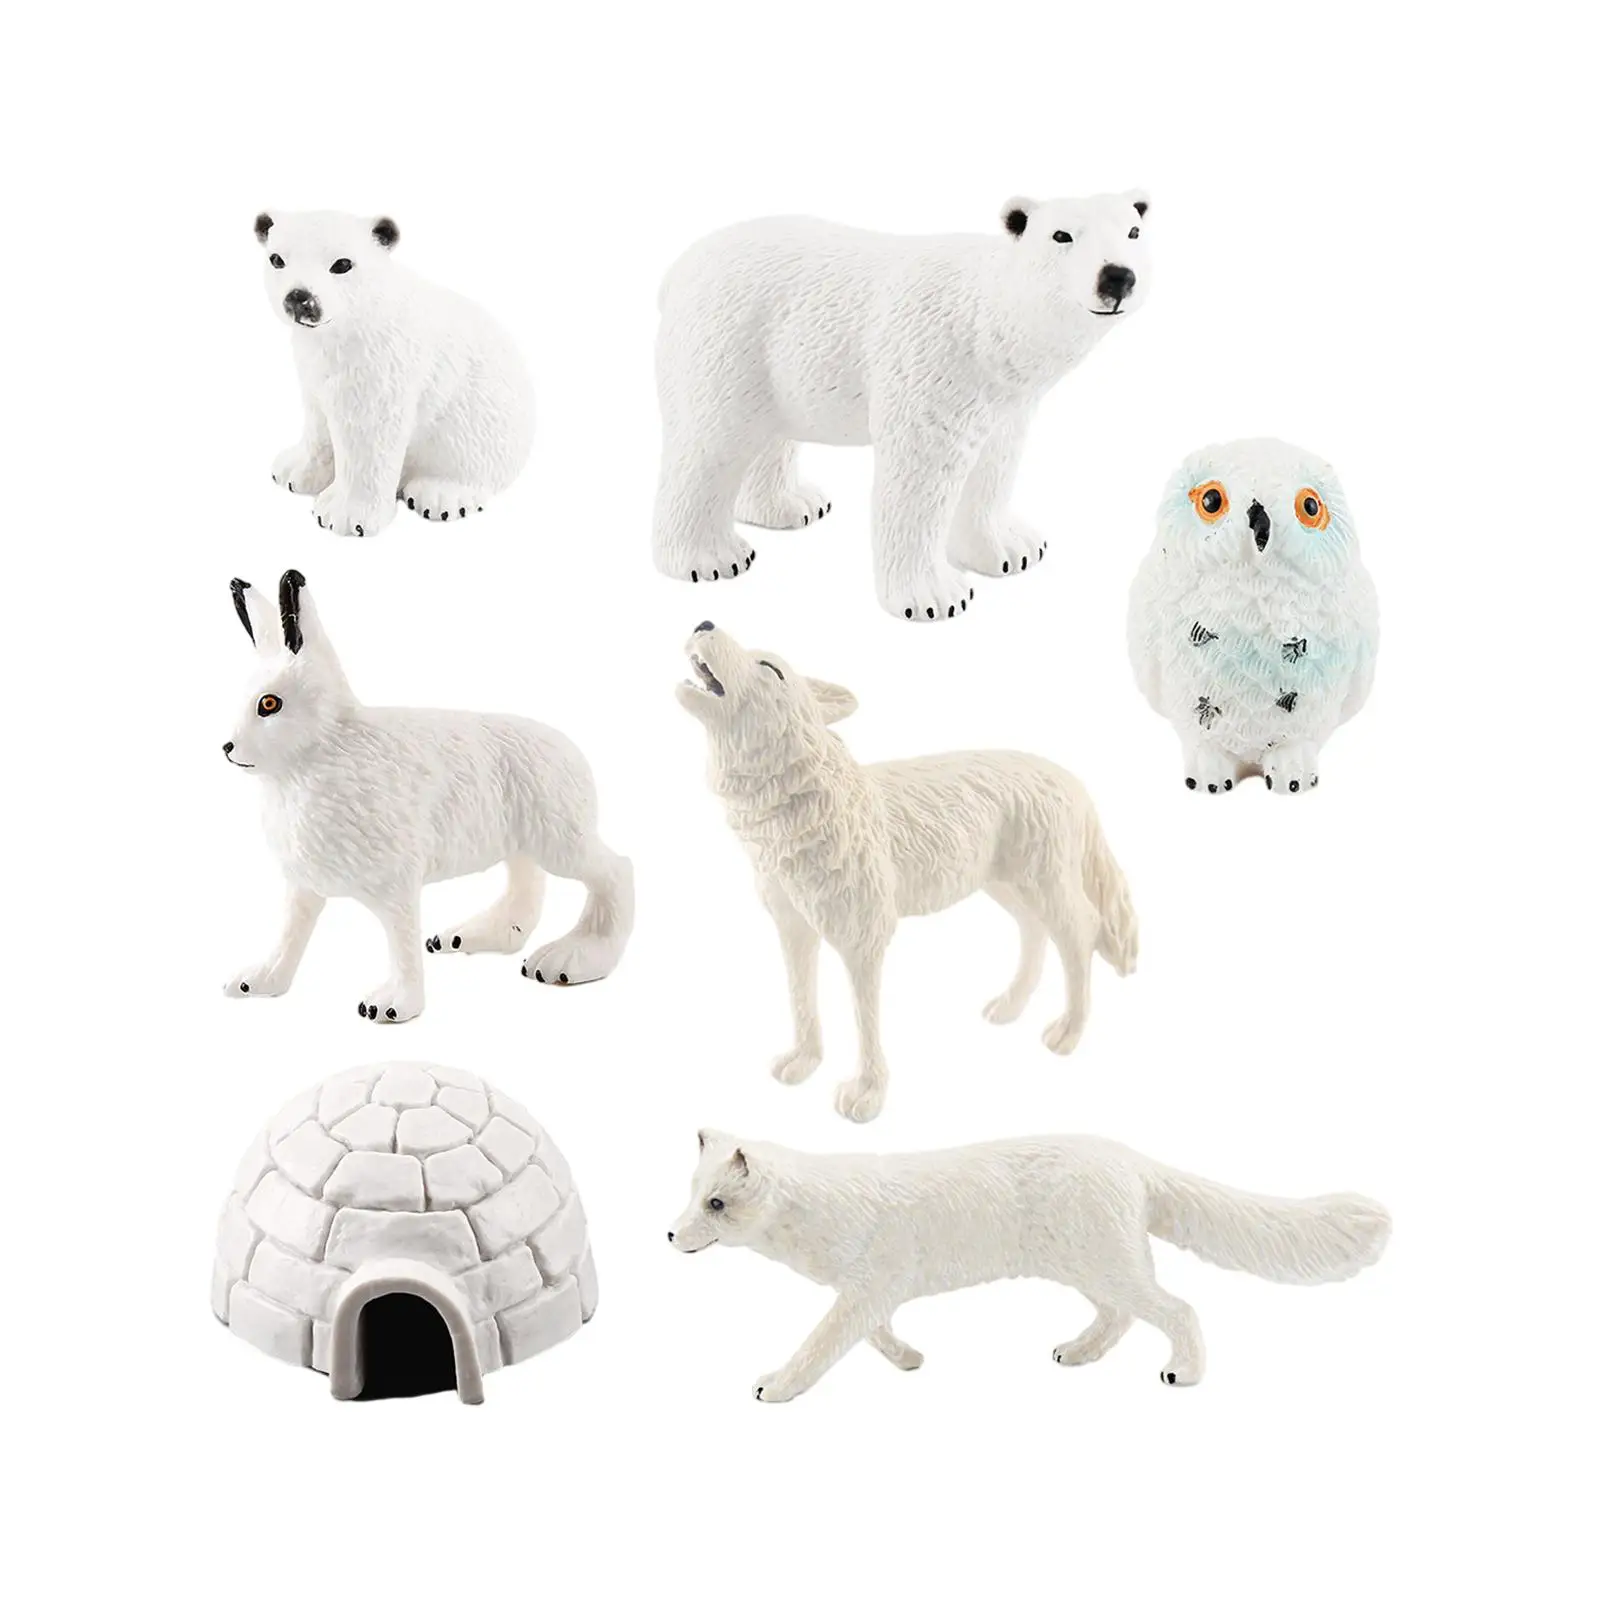 7x Arctic Animal Model Crafts for Birthday Gift Cake Topper Theme Party